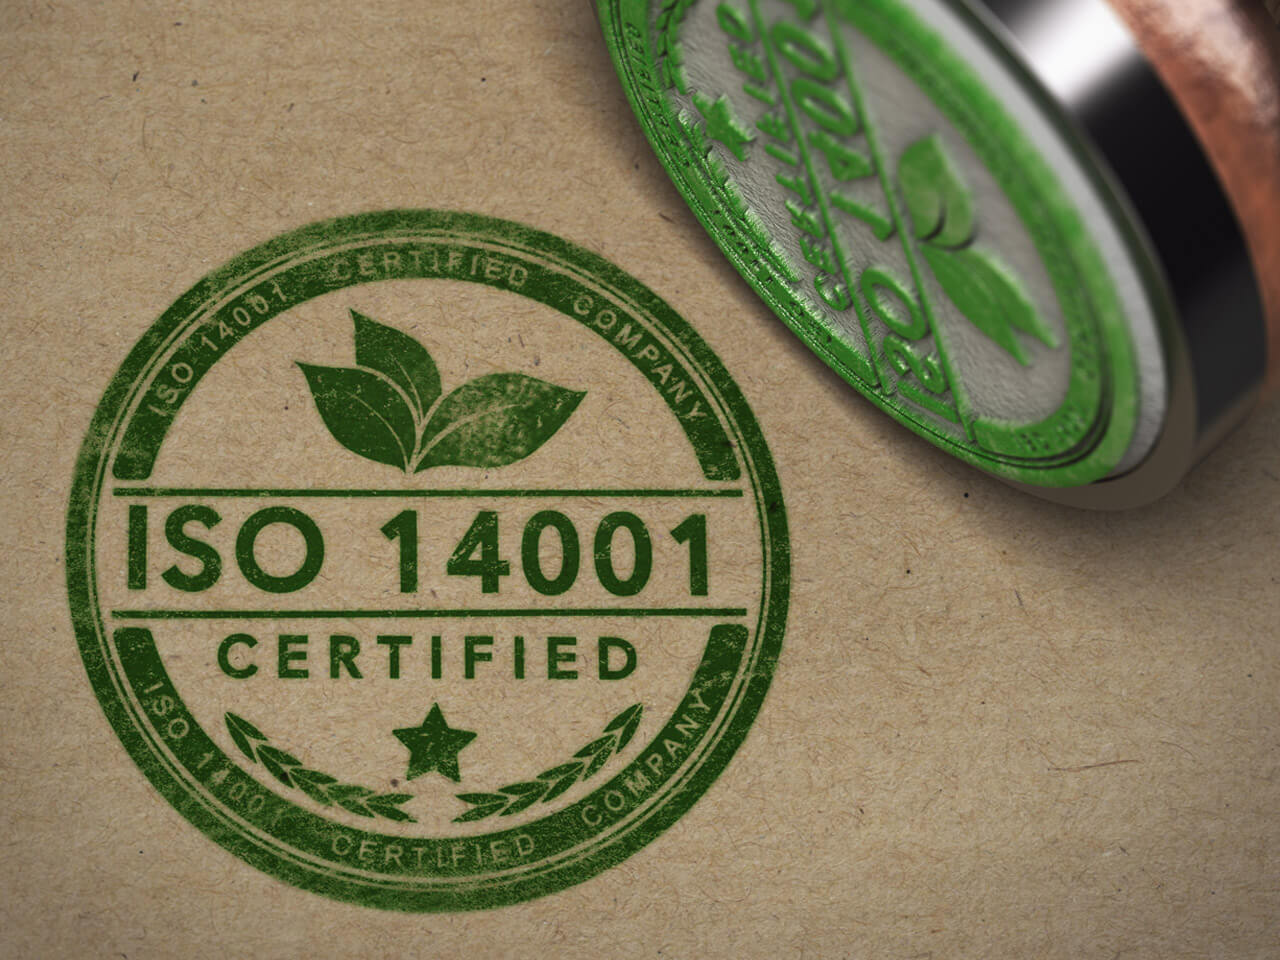 Getting ISO 14001-ISO Chicago-ISO PROS #1.